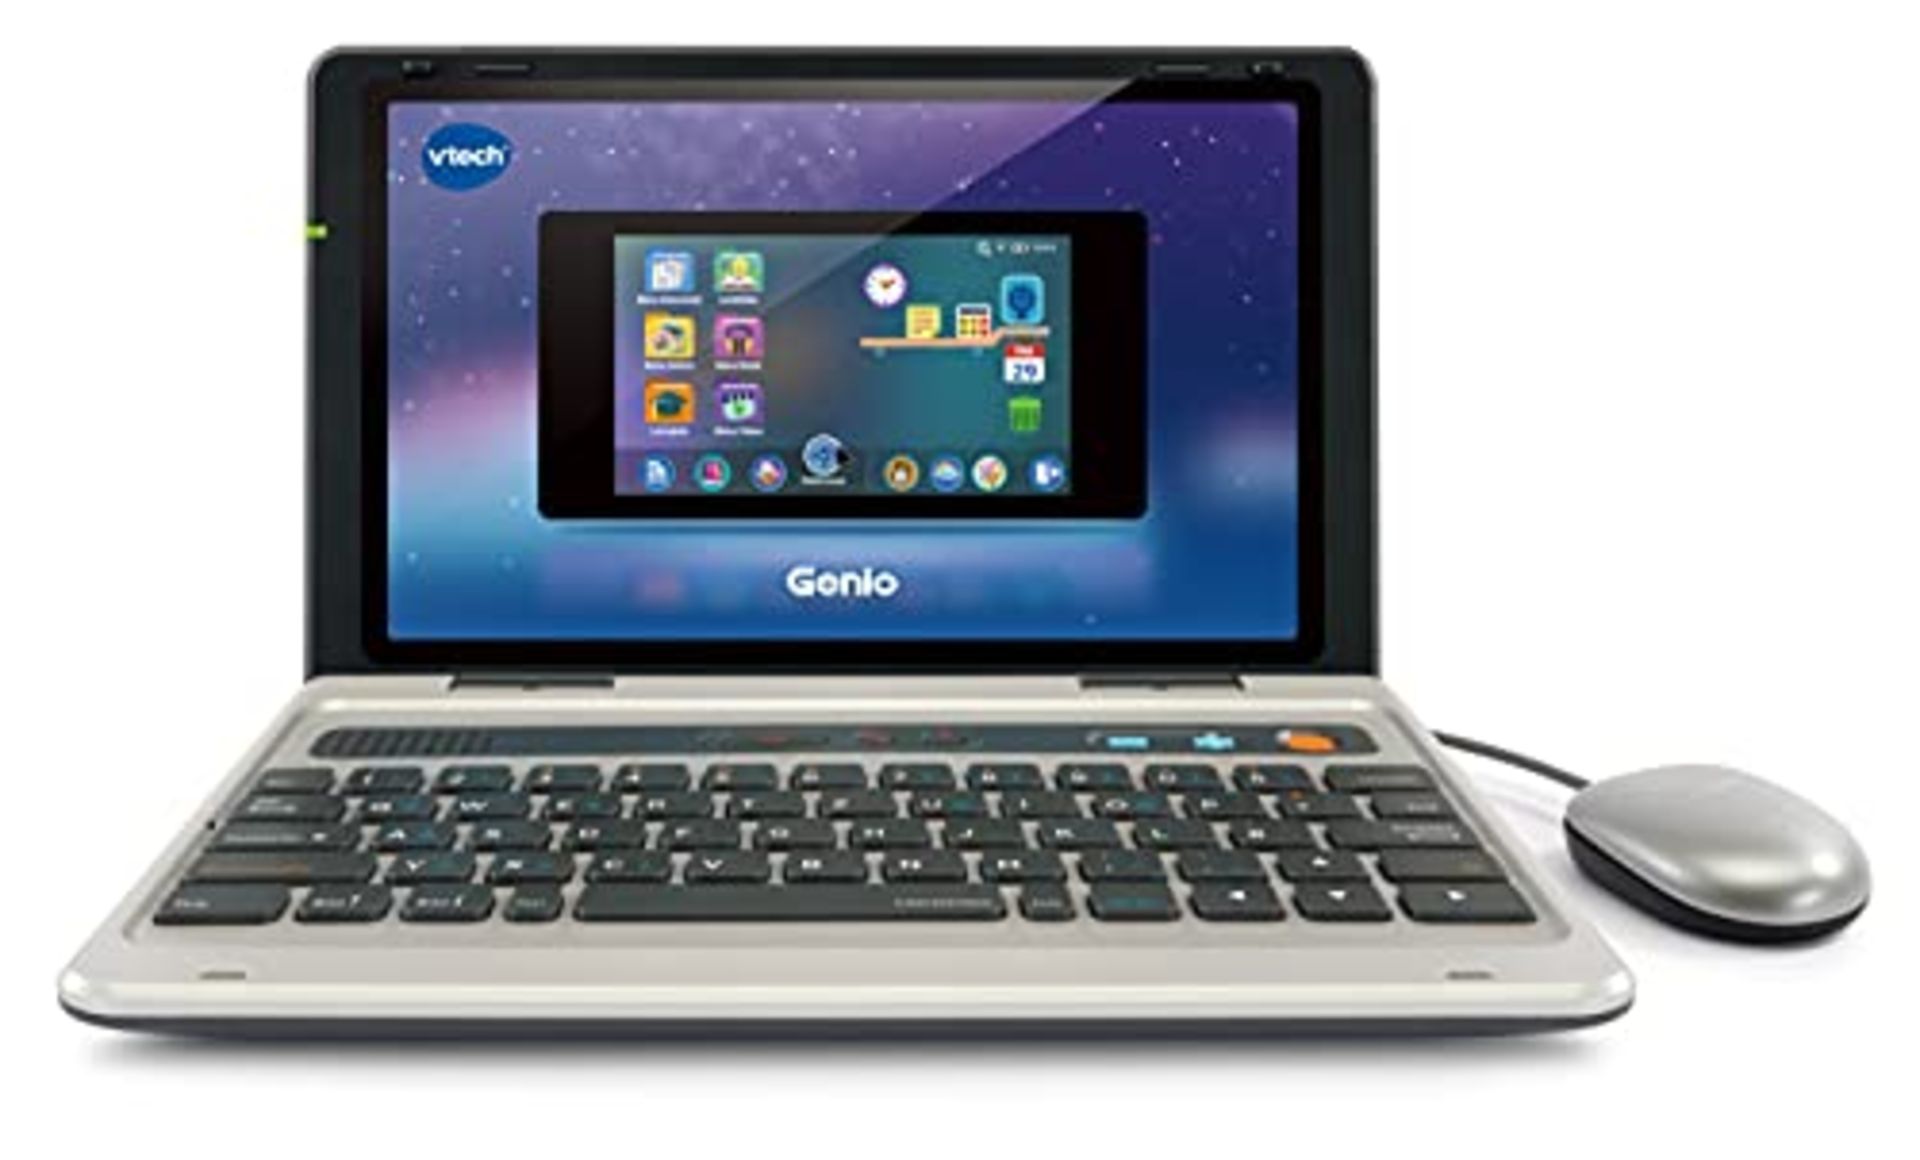 RRP £99.00 VTech Genio learning laptop - learning computer with internet access, text program and